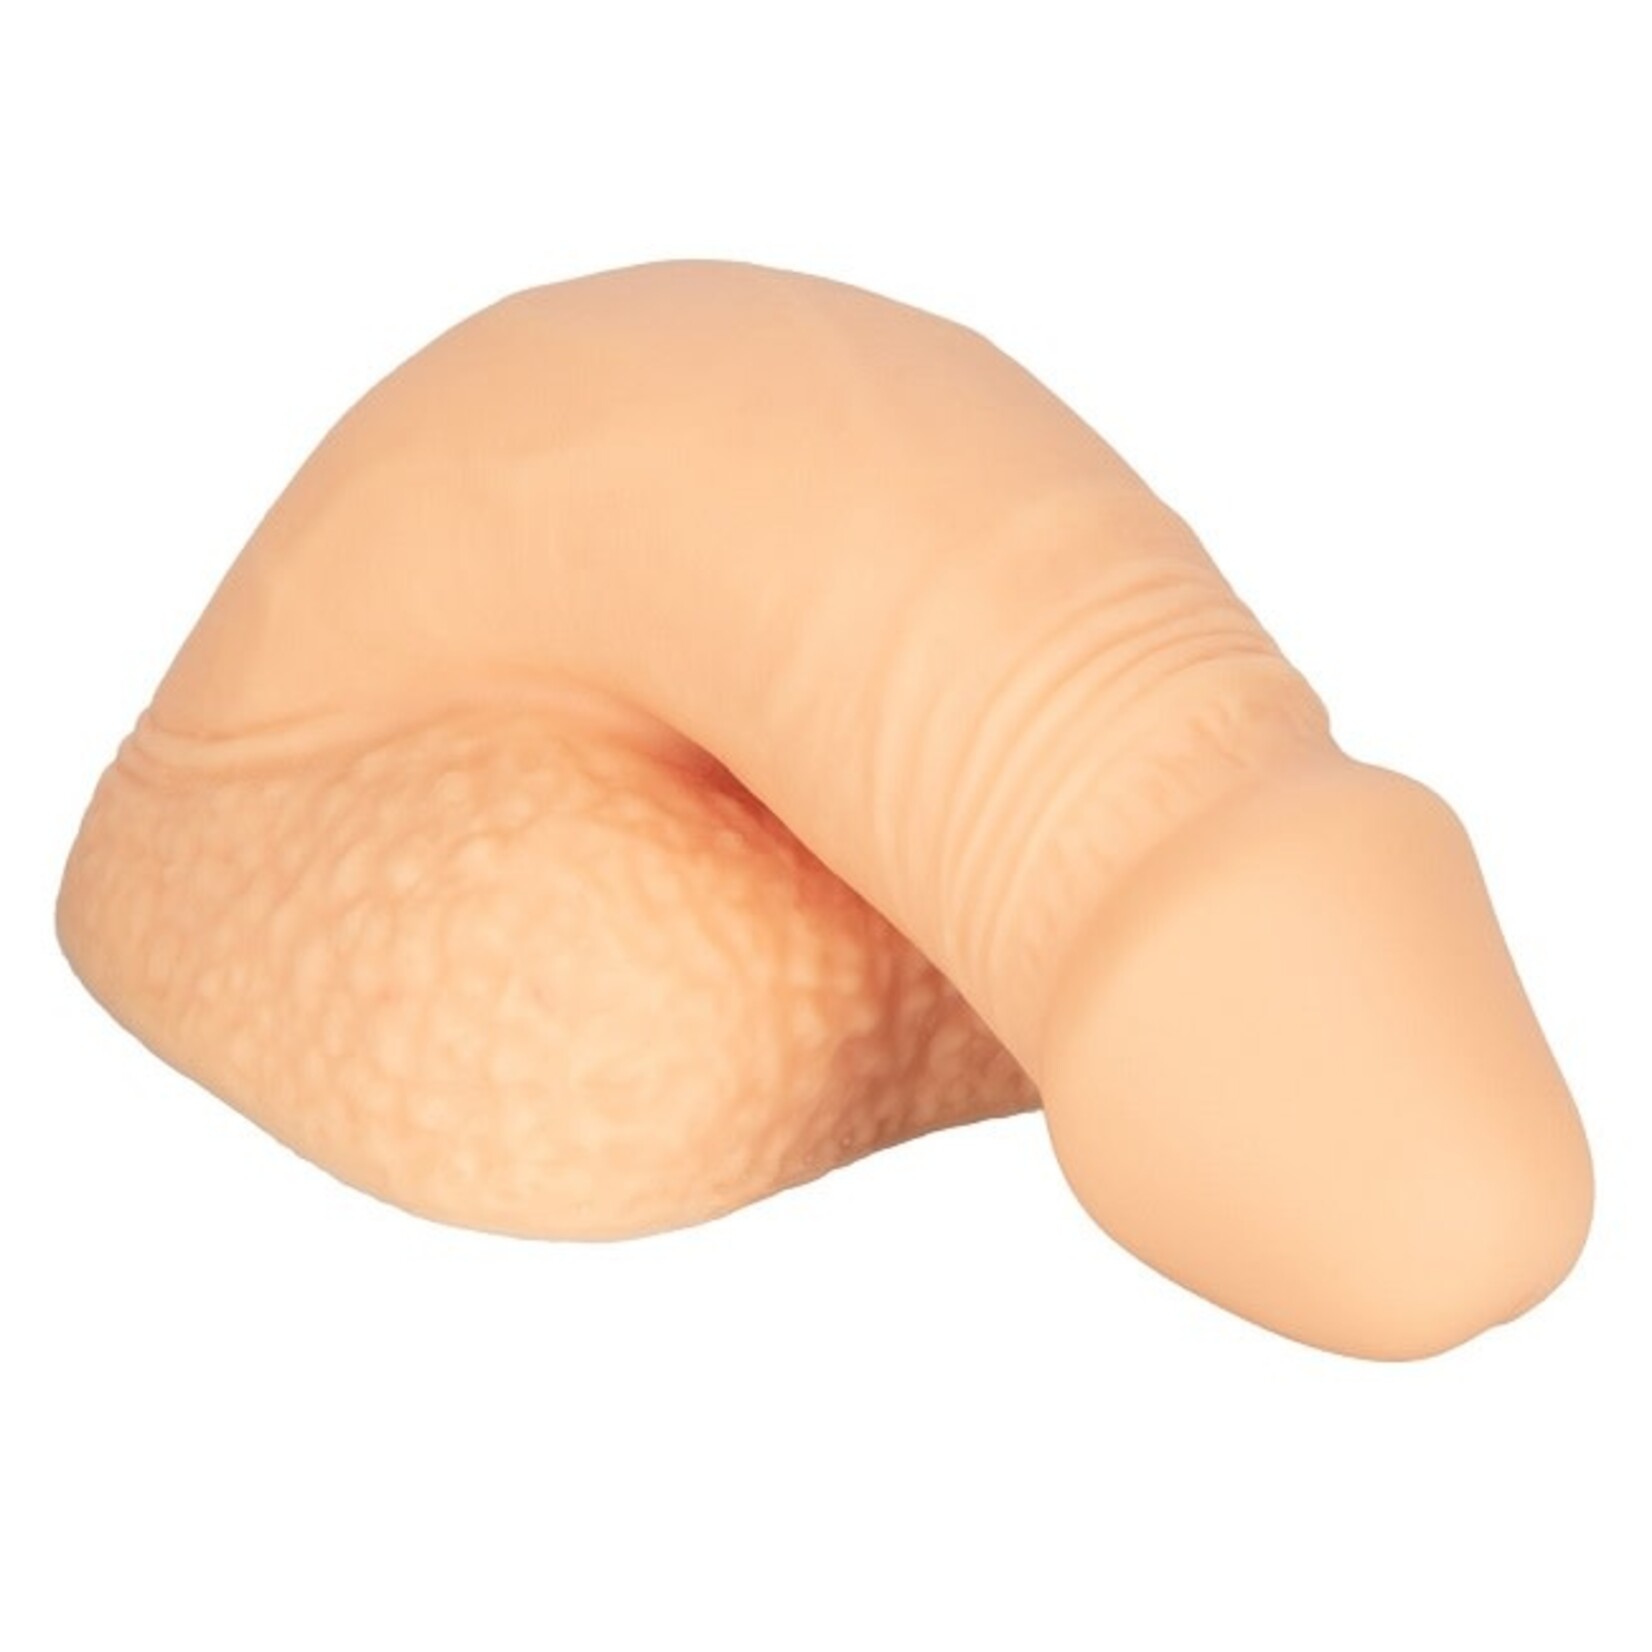 CalExotics Packer Gear 5" Silicone Packing Penis